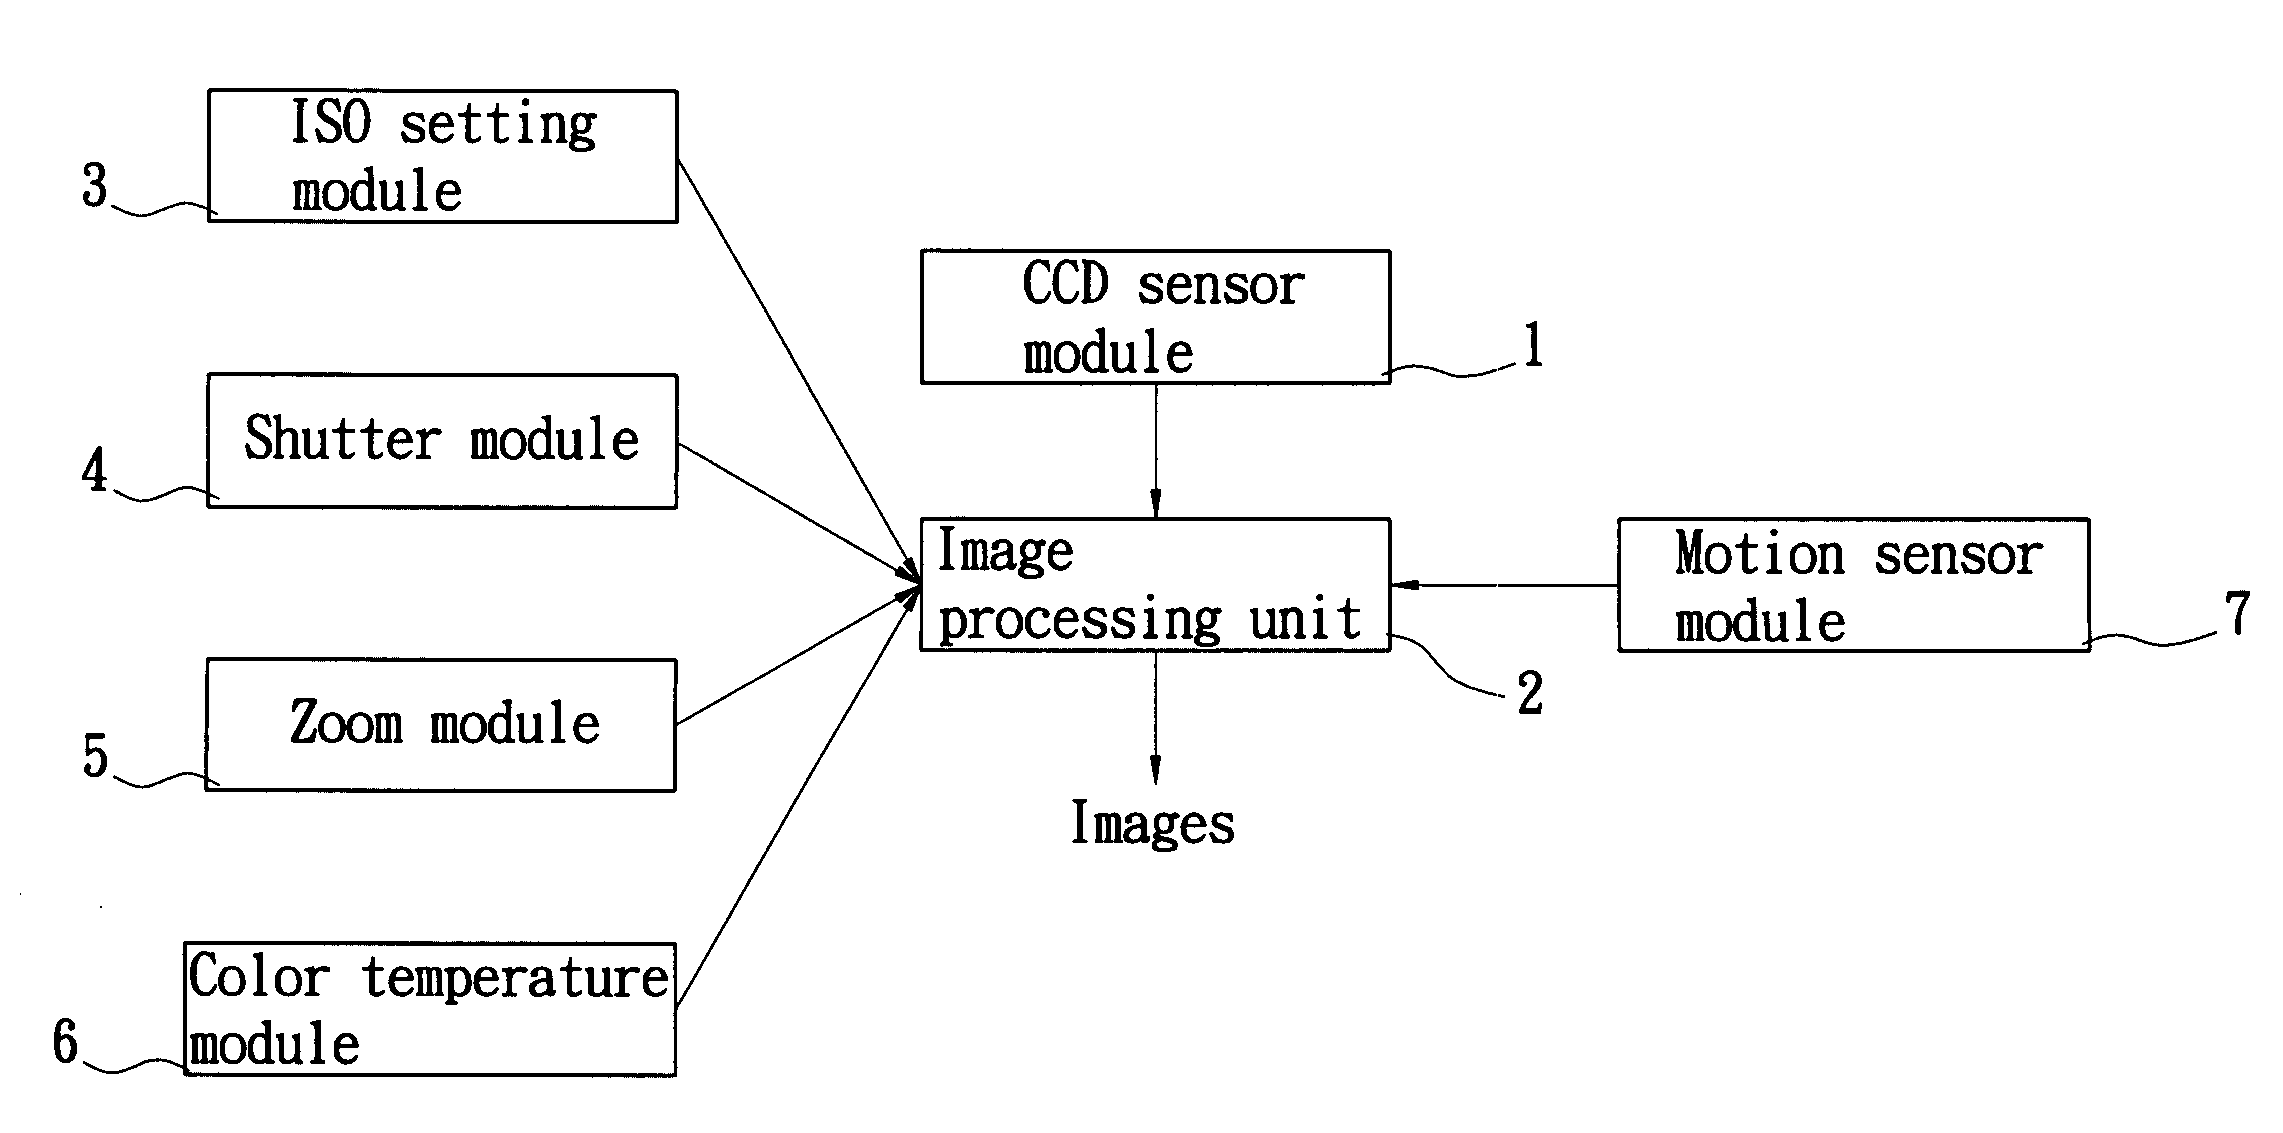 Method for determining imaging quality of a camera via a motion sensor and ISO settings